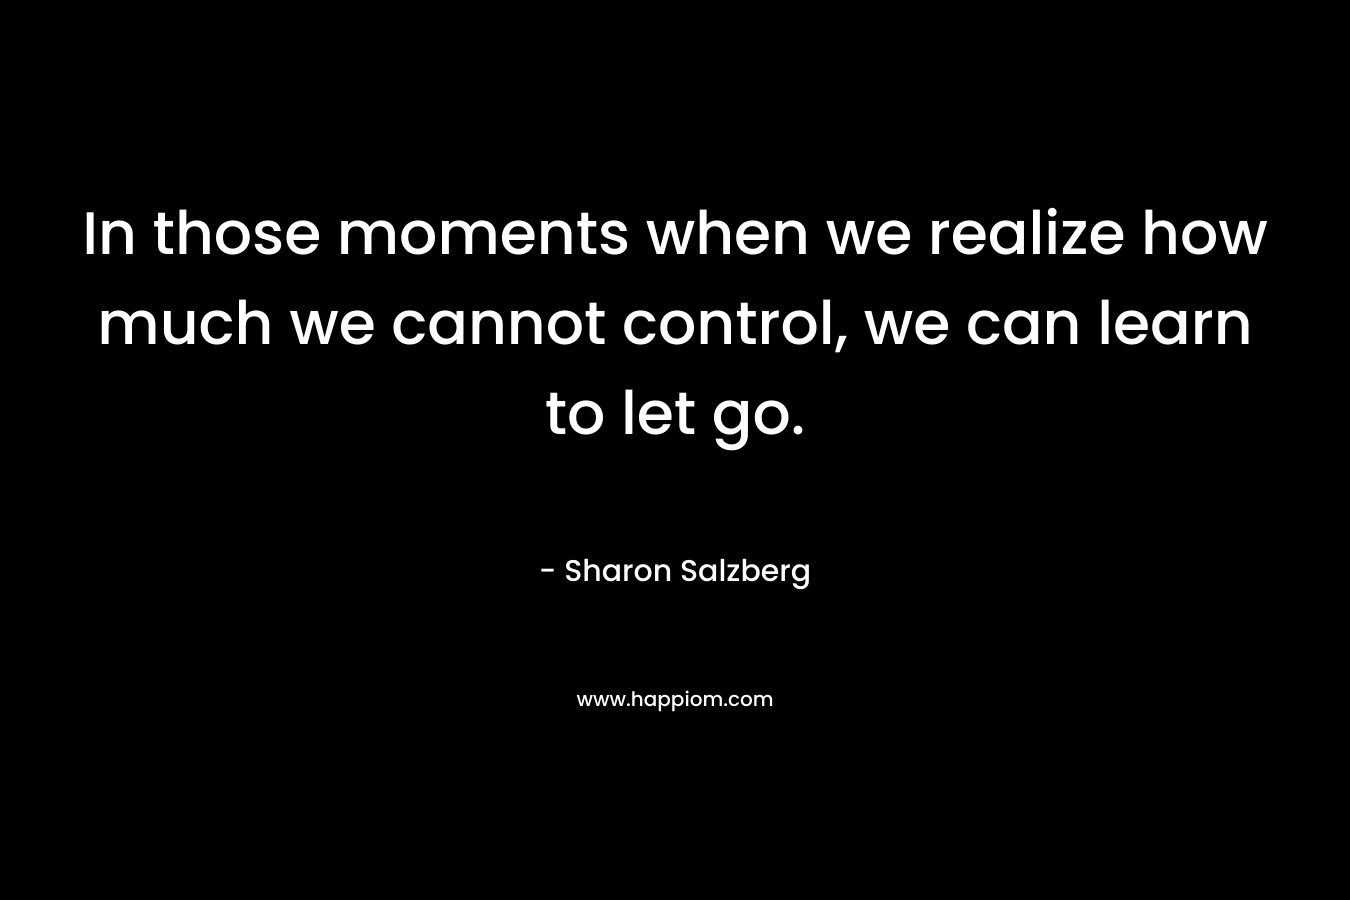 In those moments when we realize how much we cannot control, we can learn to let go.